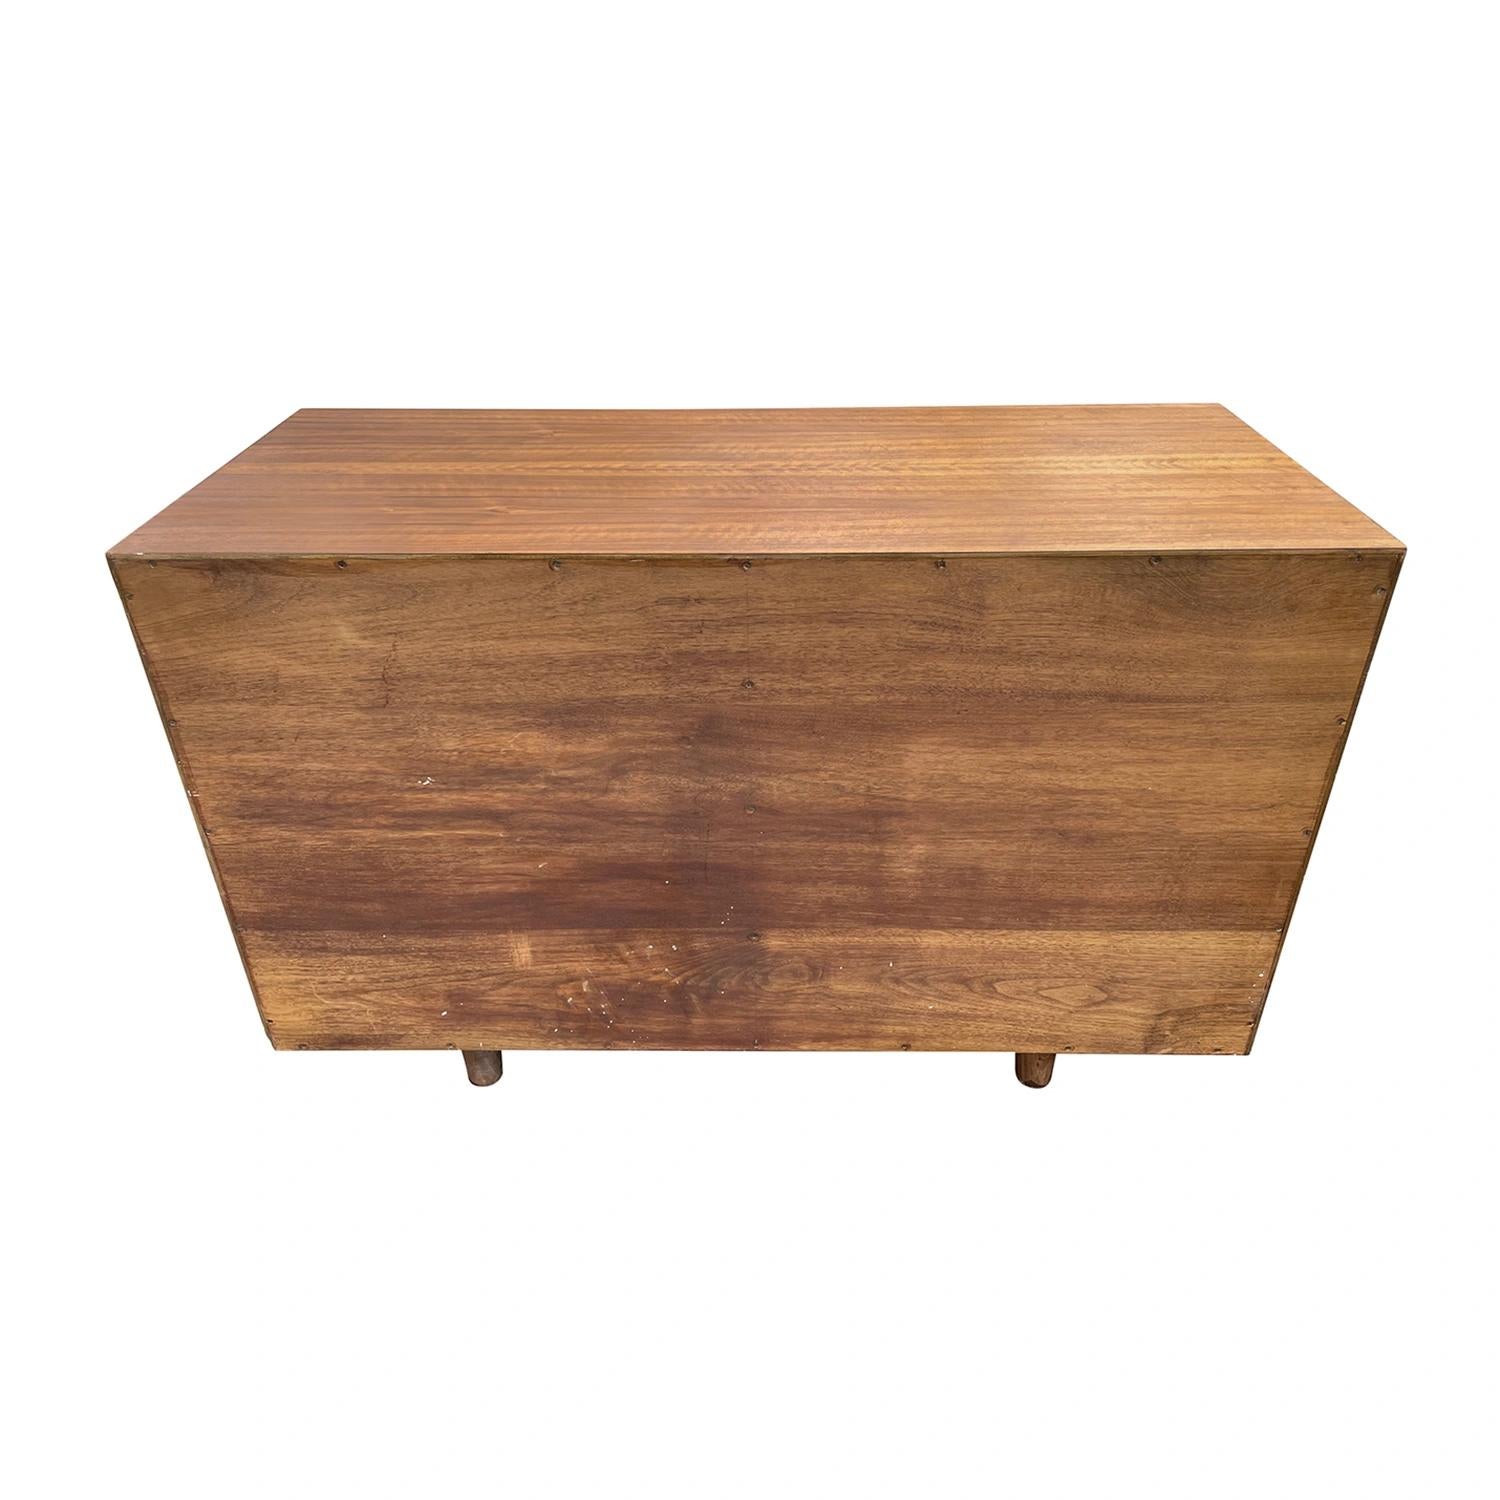 20th Century Brown Italian Walnut M. Singer & Sons Dresser, Cabinet by Gio Ponti For Sale 5